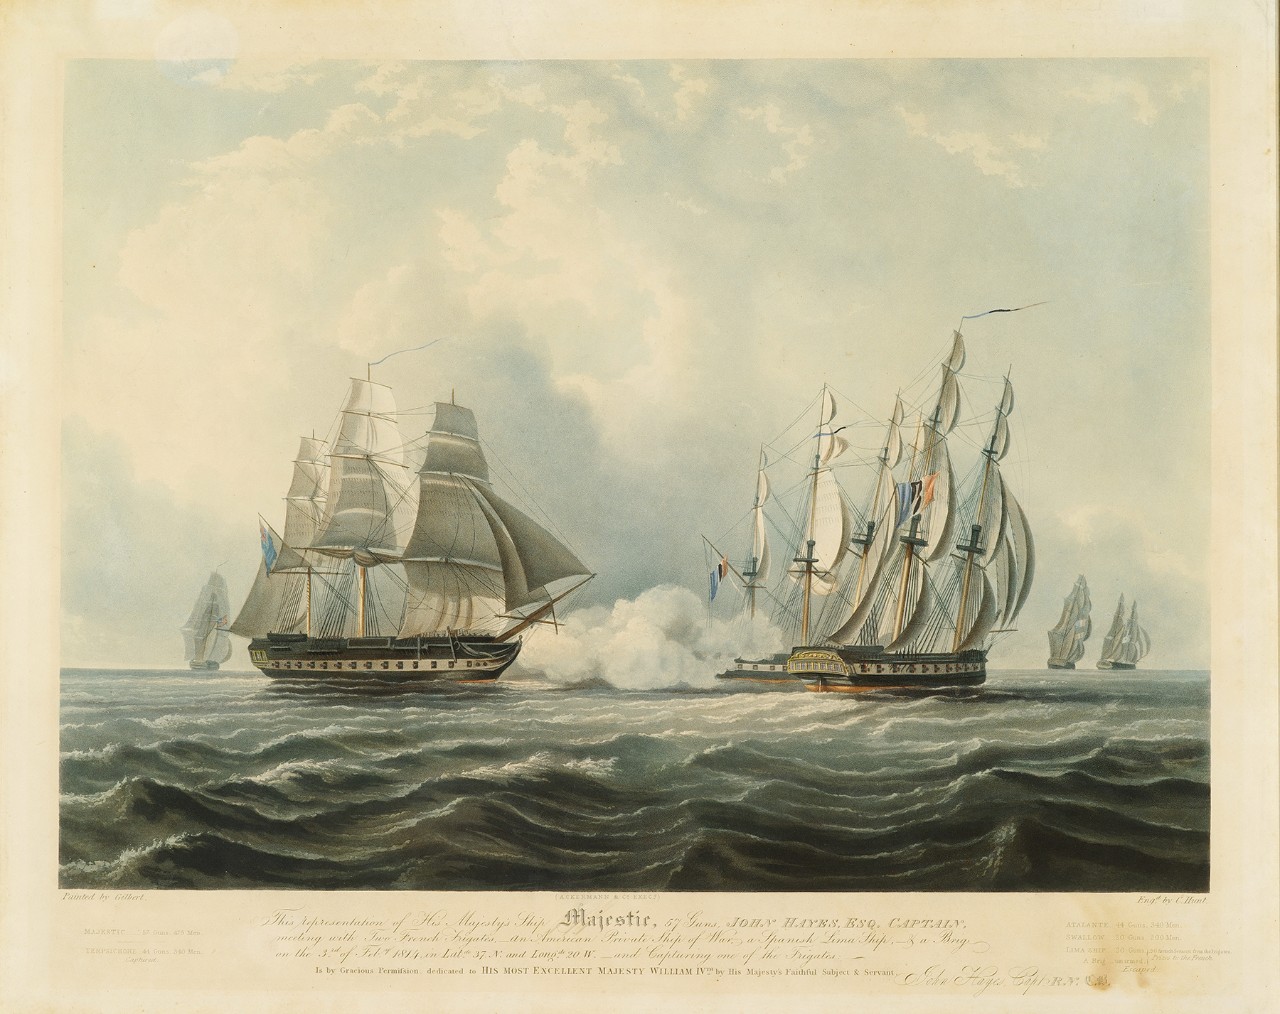 A ship battle, in the foreground a British ship engaging two French ships. In the background, on left side an American ship Swallow is fleeing and on the right two ships are fleeing the battle